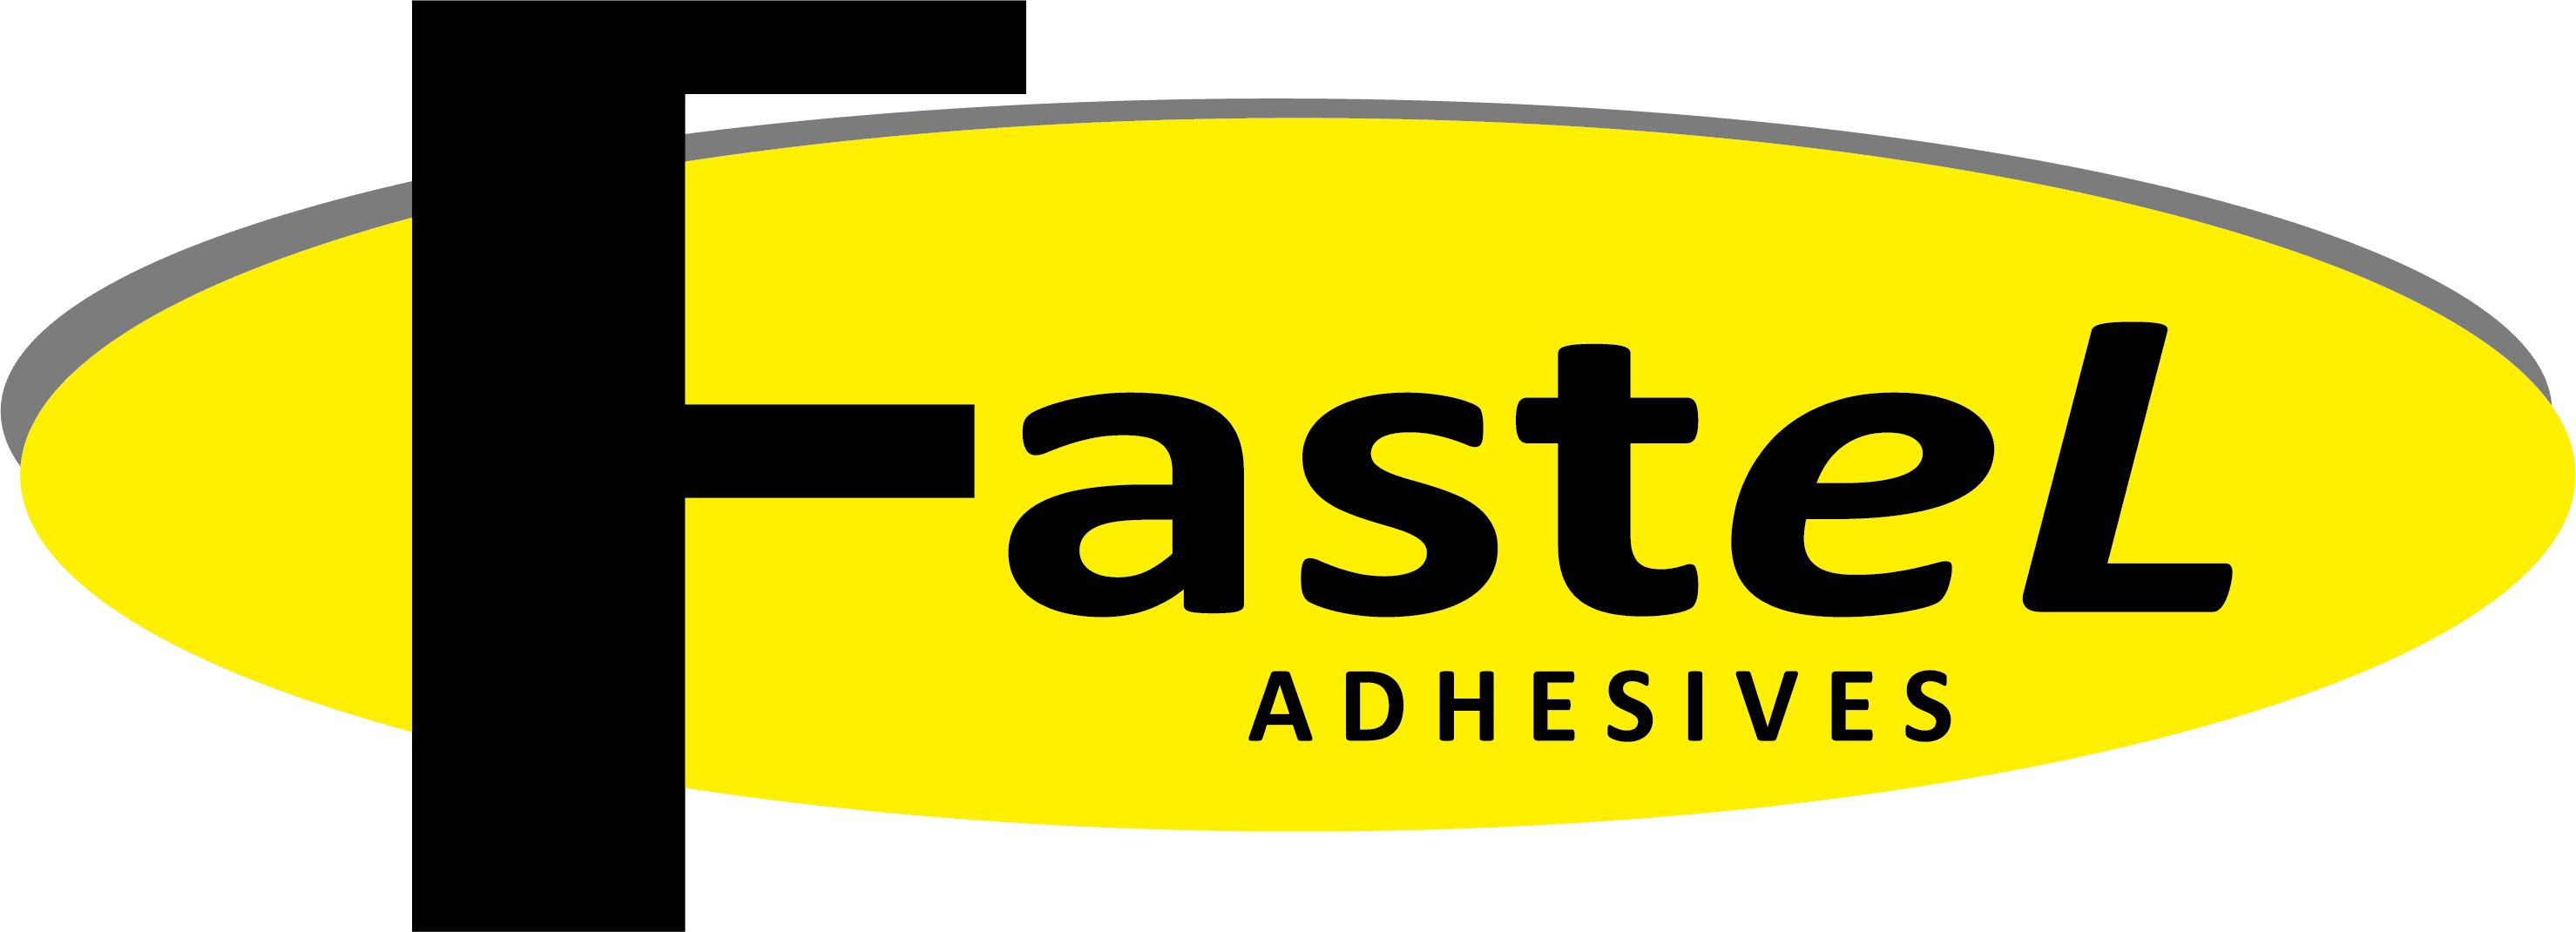 Fastel Adhesives and substrate products offers a range of heat activated adhesive films as well as heat seal and induction seal aluminum foils.